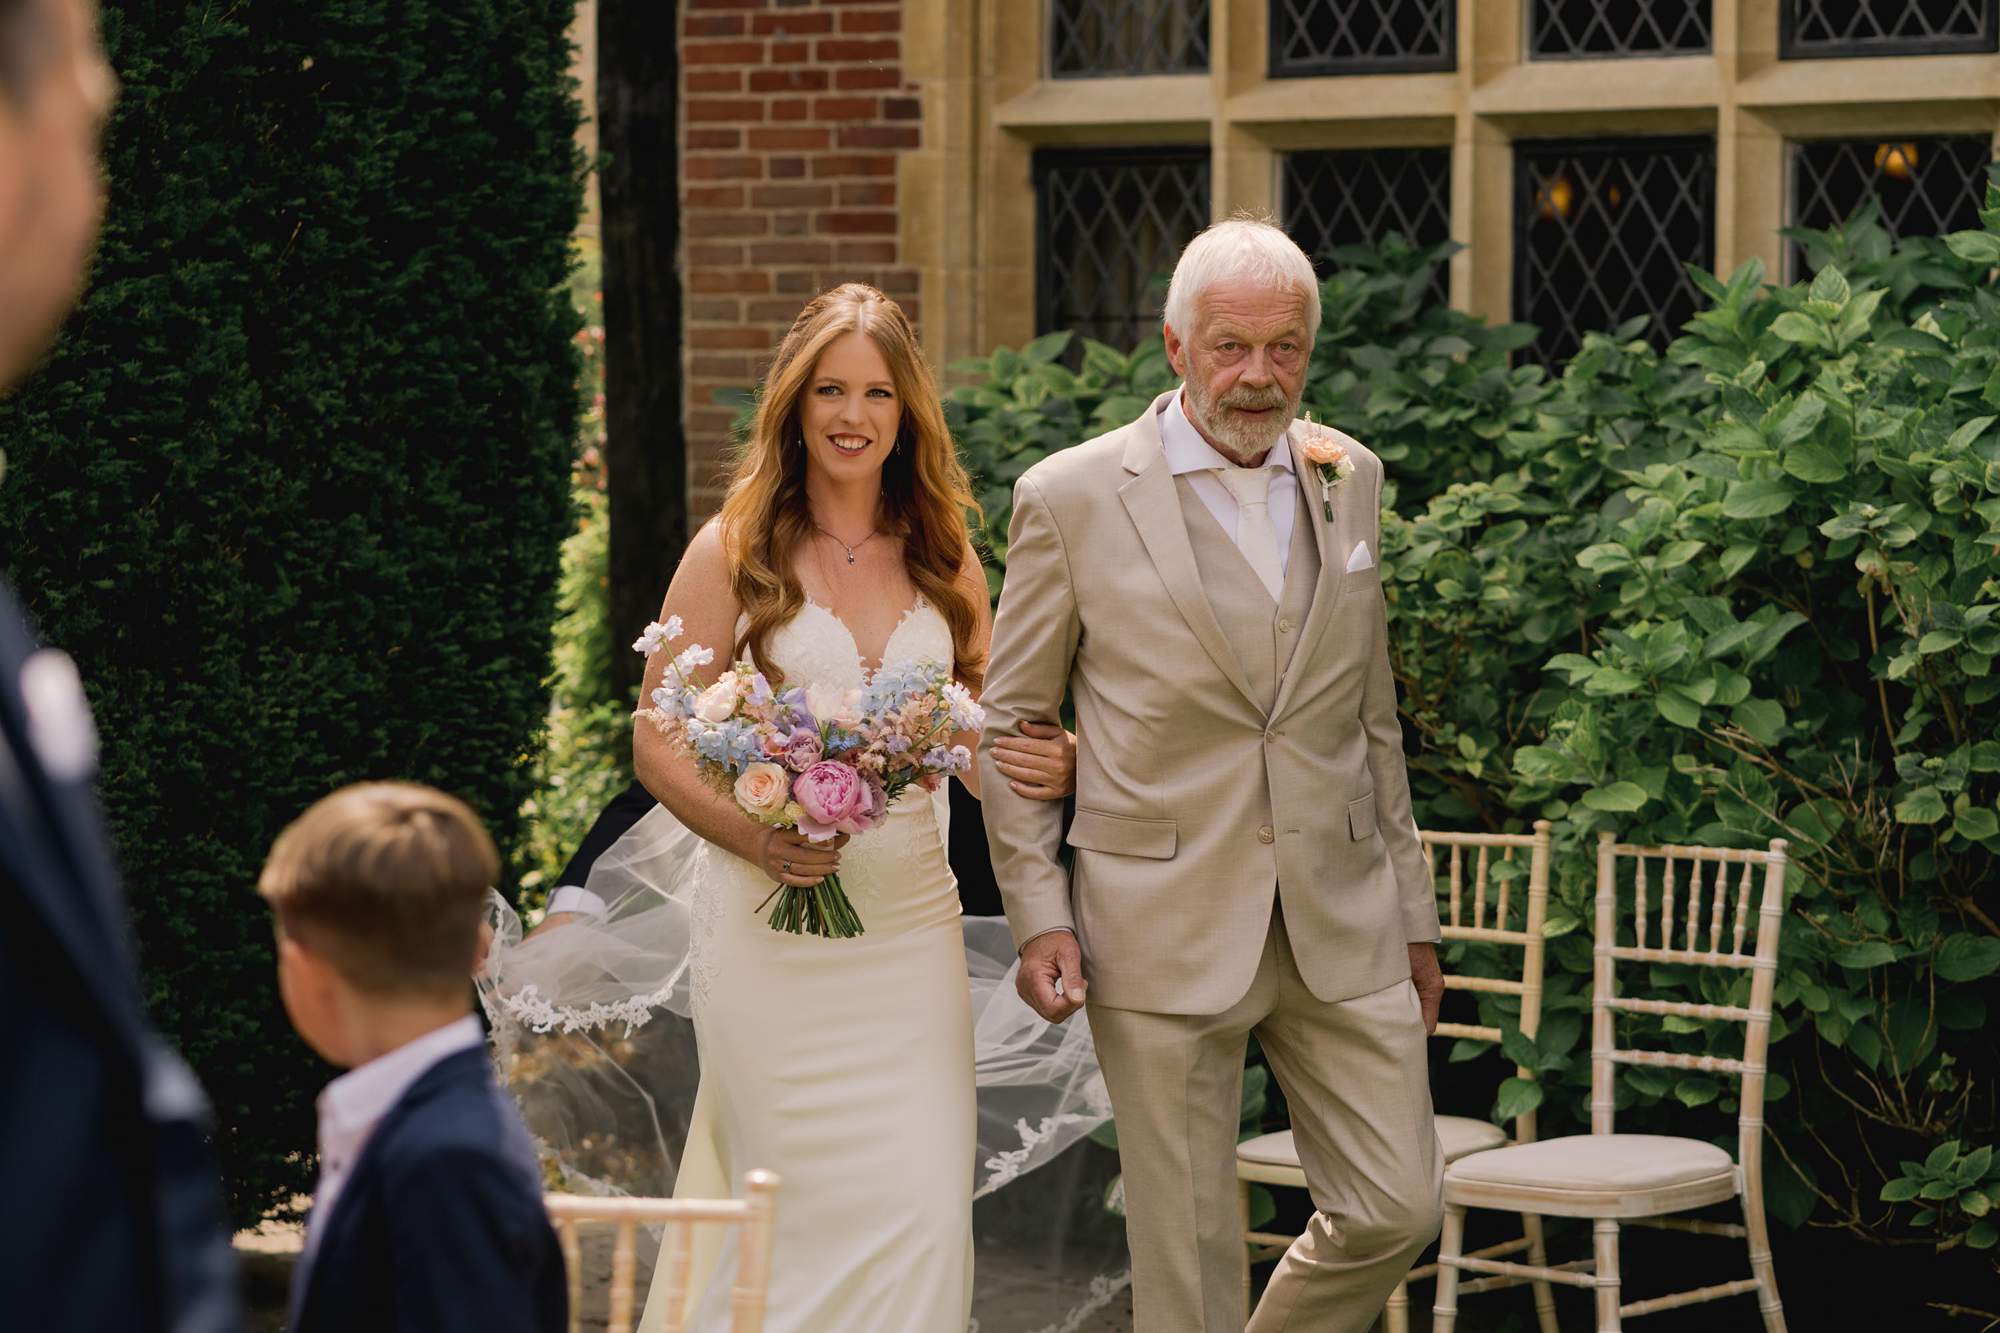 A bride walks down the aisle with her father during an outdoor ceremony at Amberley Castle in West Sussex.